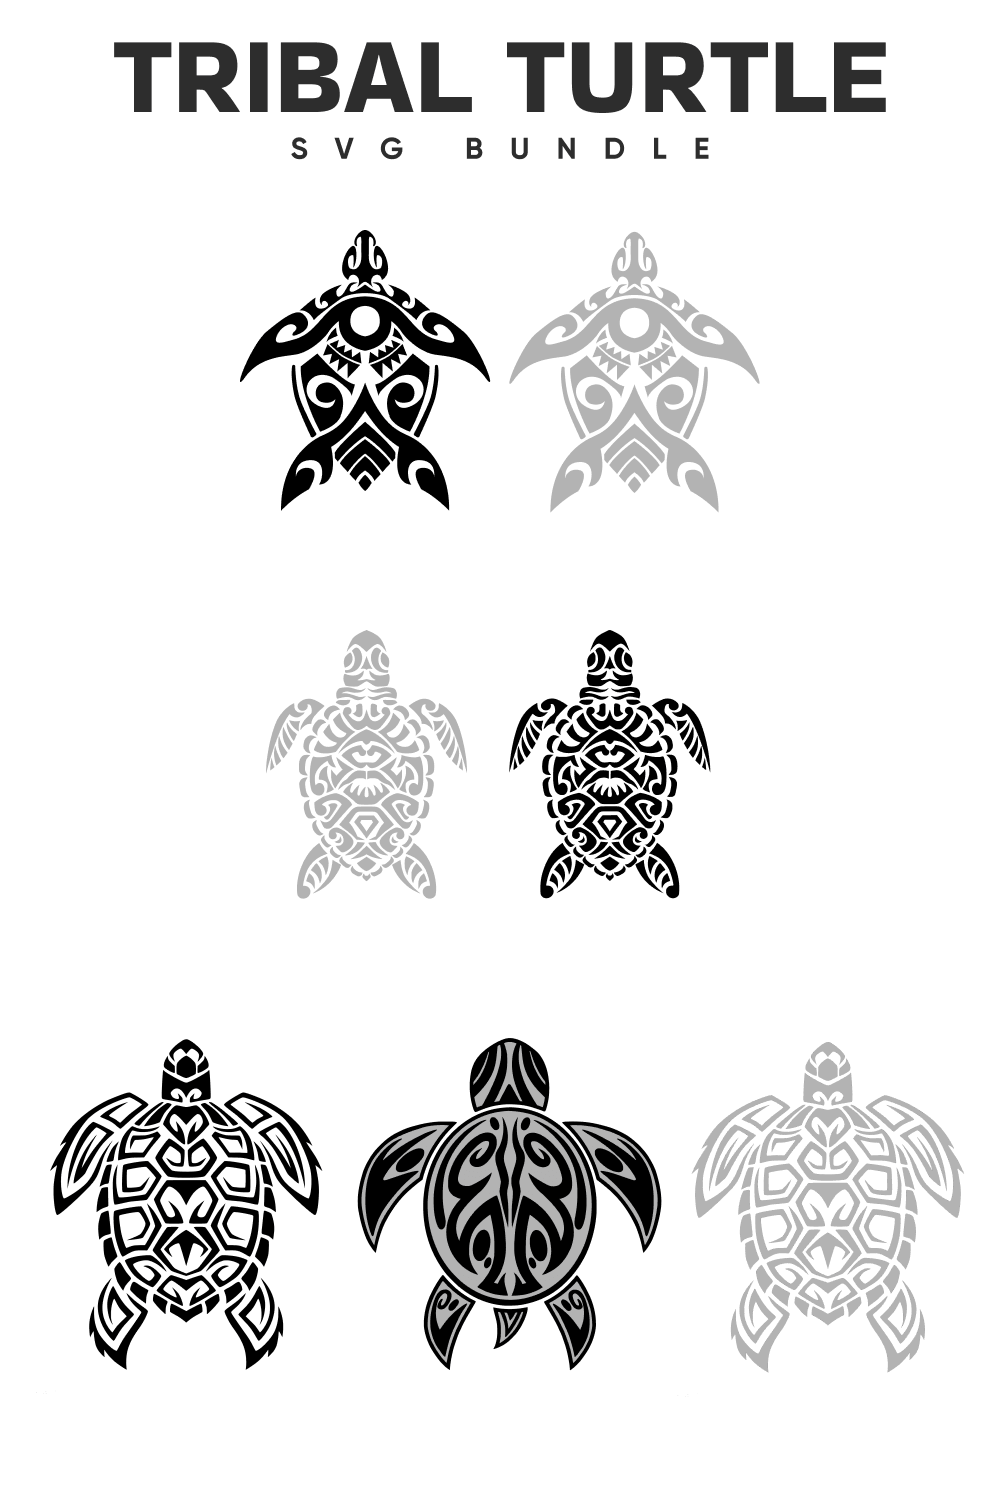 Tribal turtle tattoo designs on a white background.